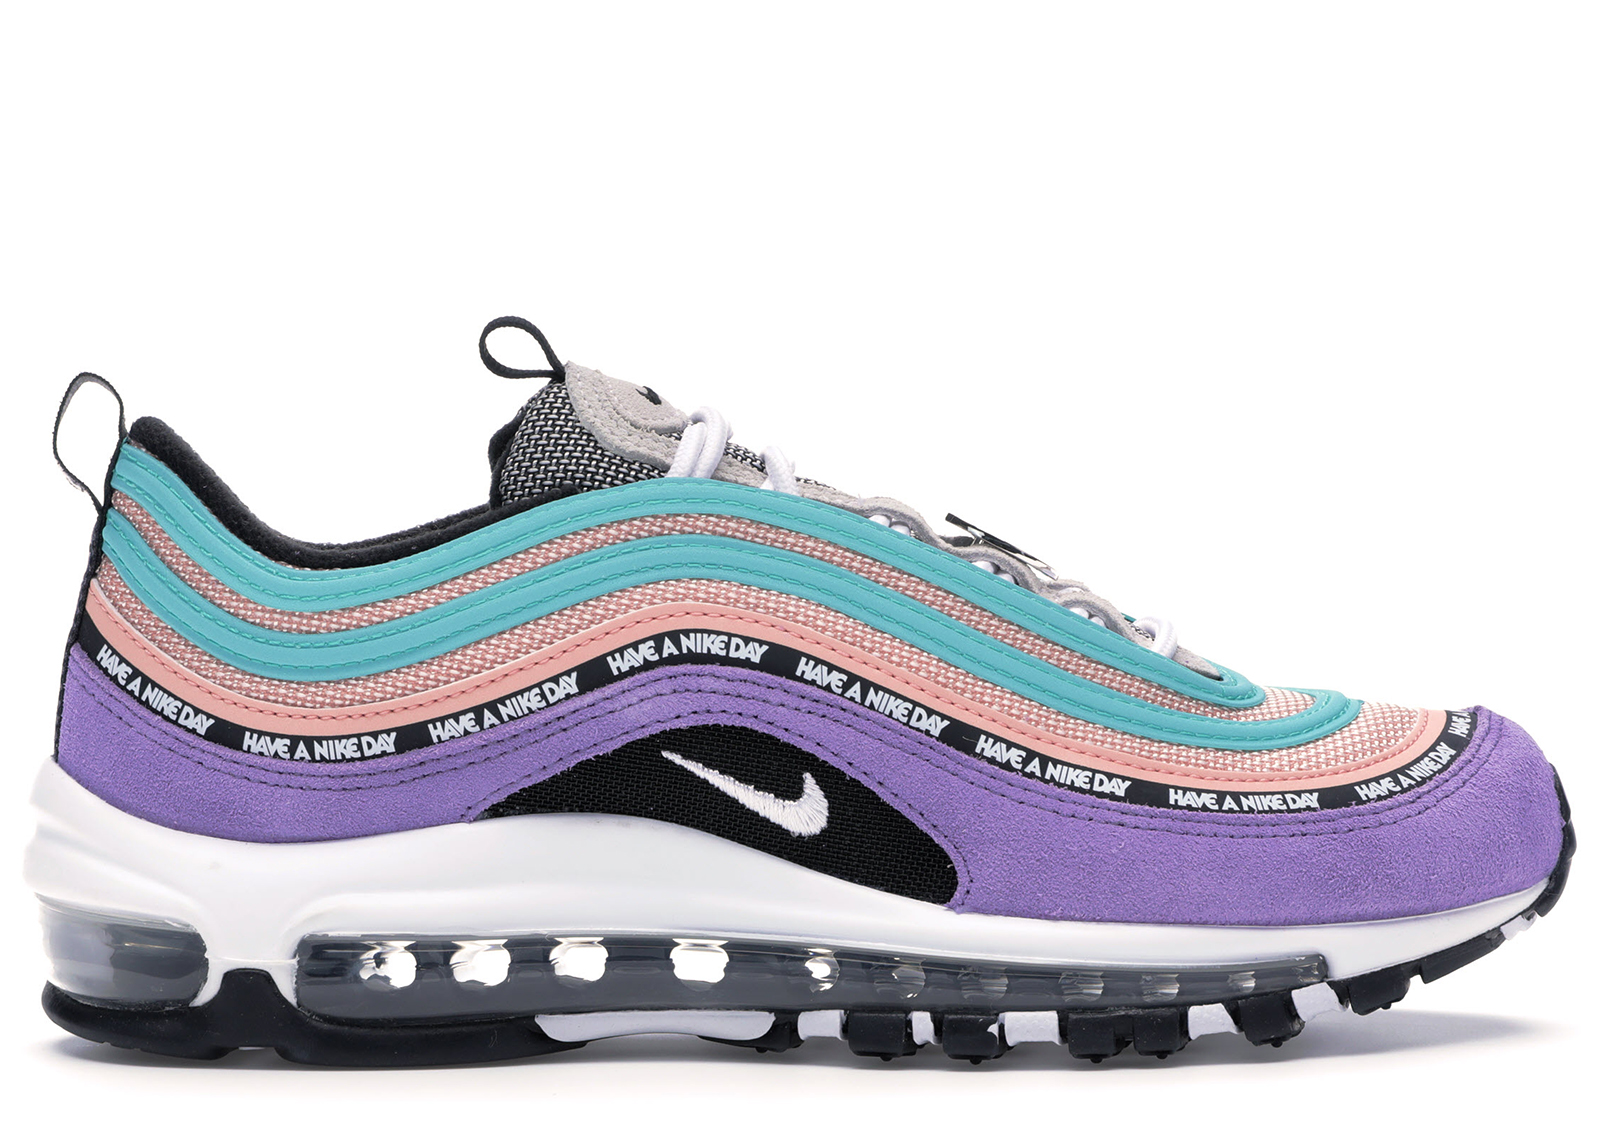 Nike Air Max 97 Have a Nike Day (GS 